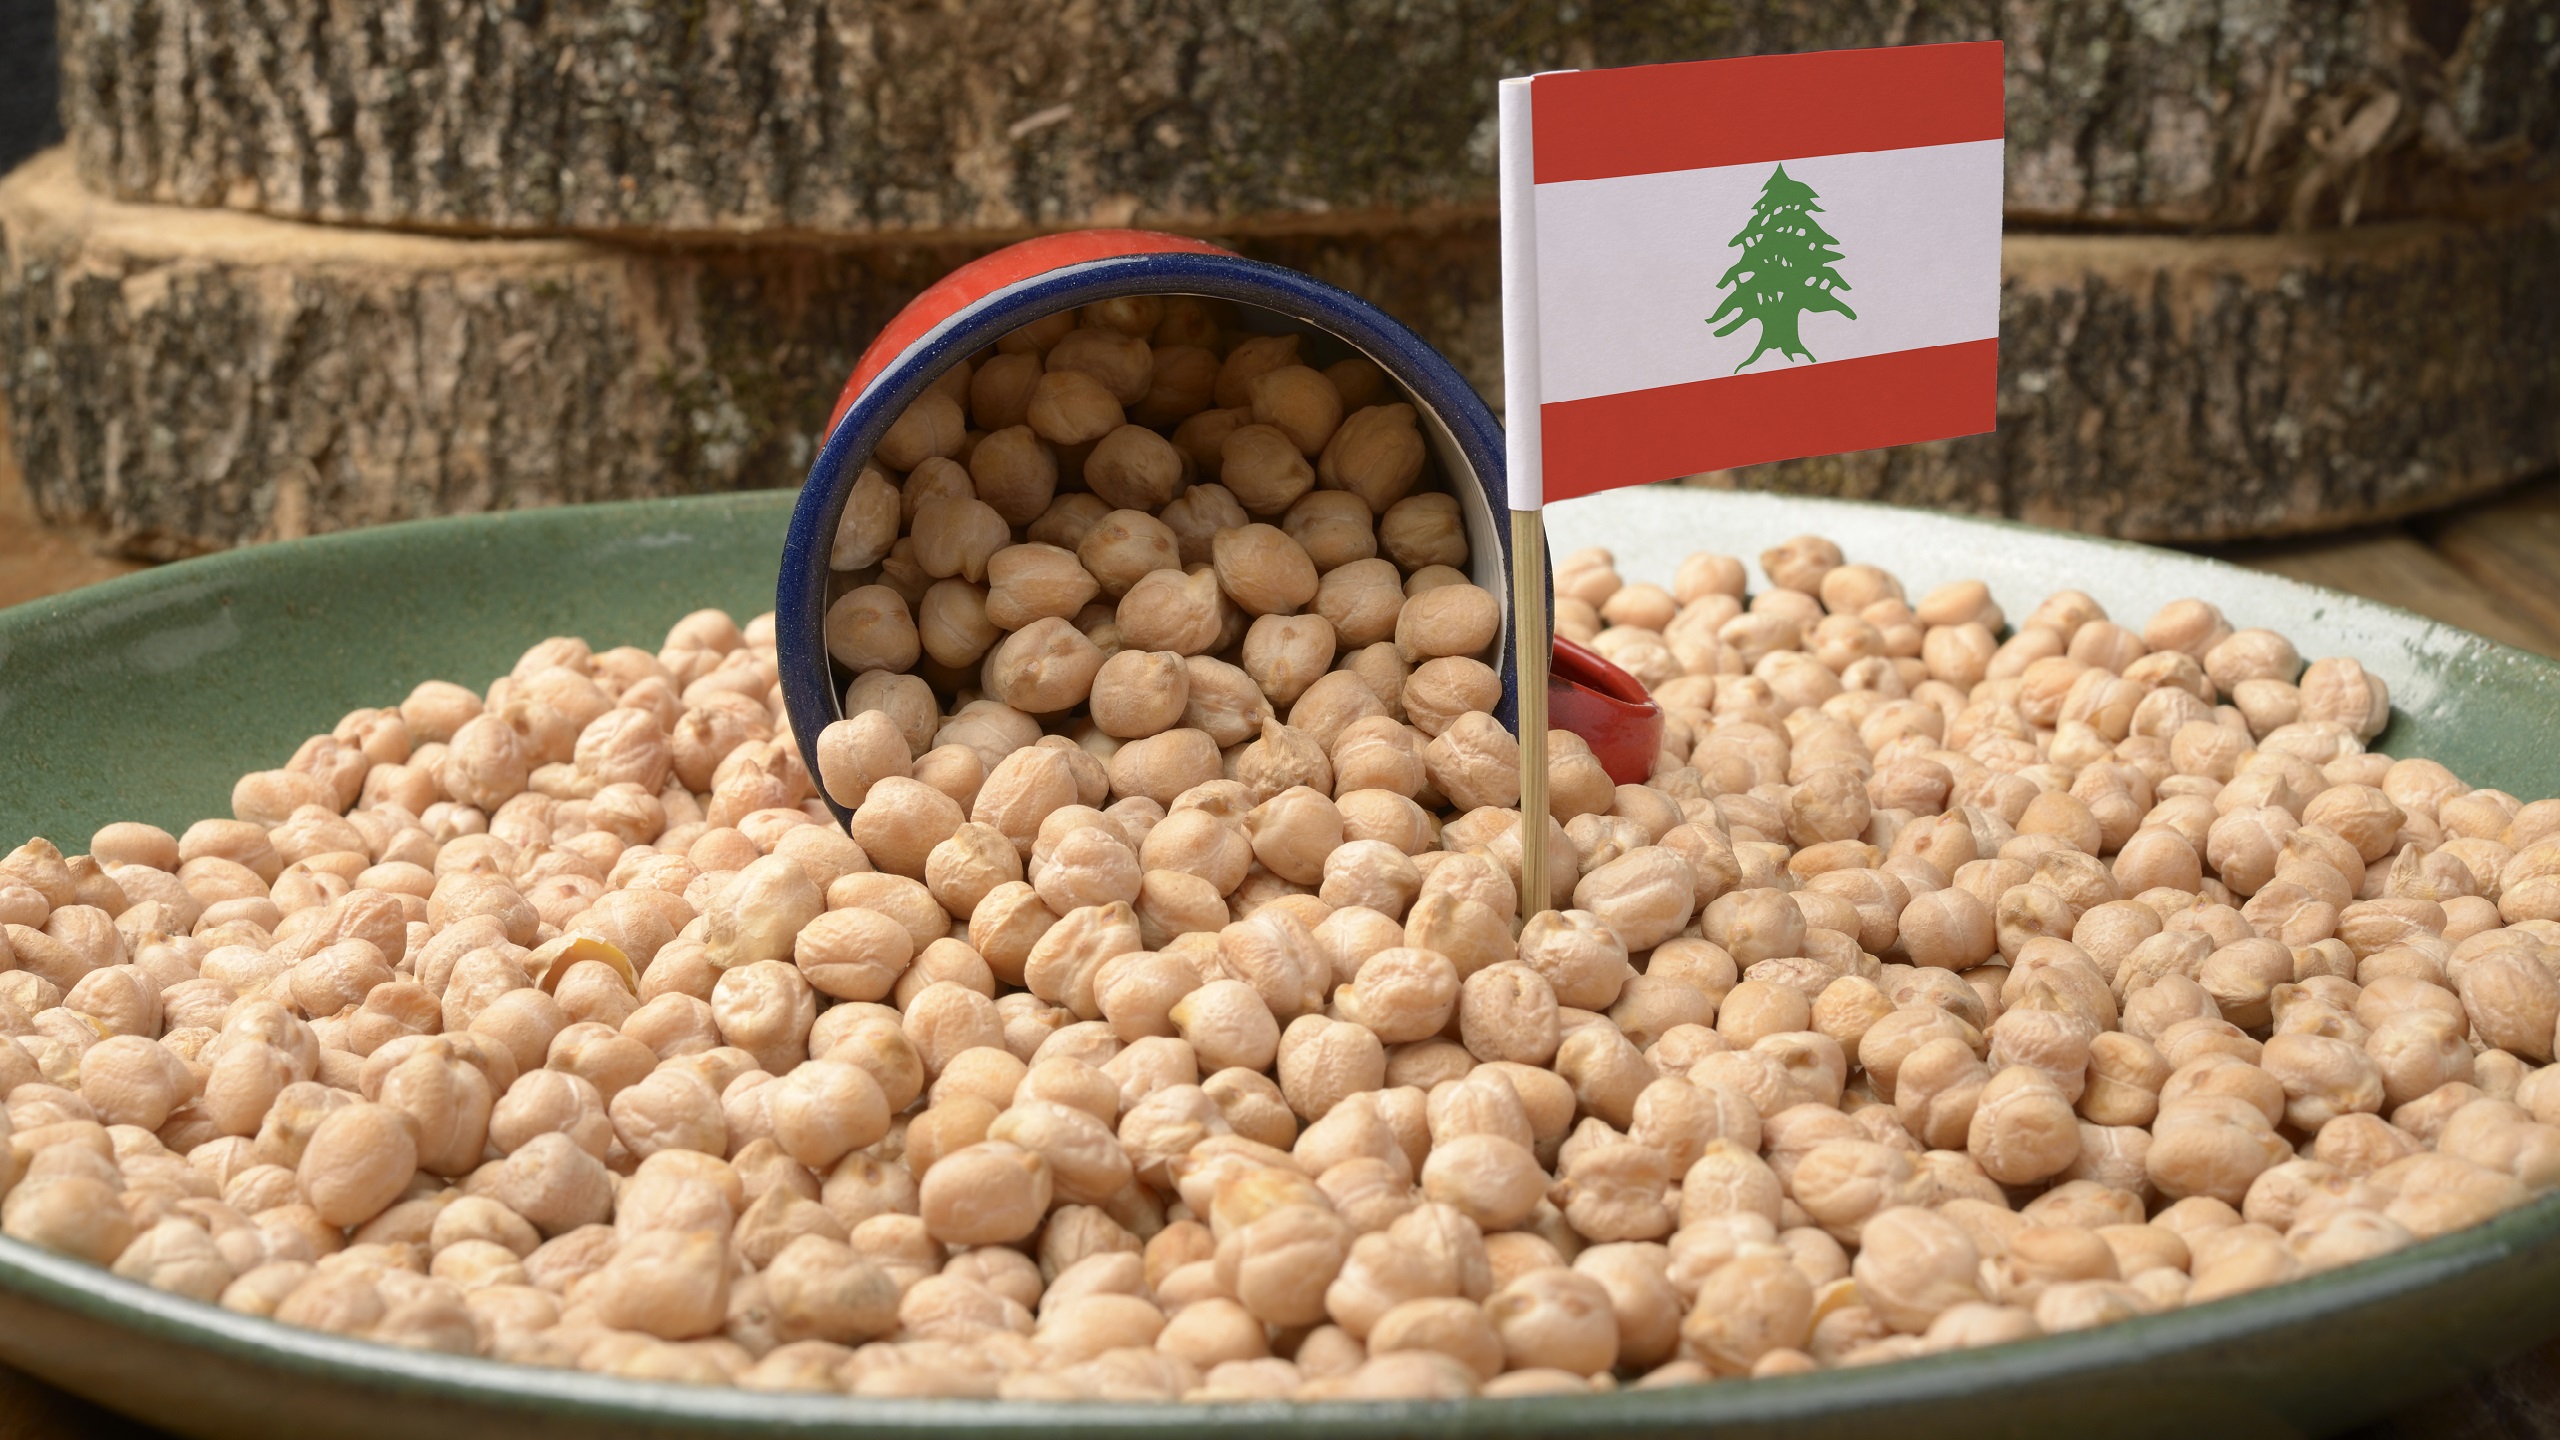 Lebanon’s President Asks UN Agency To Help Export Agricultural Products